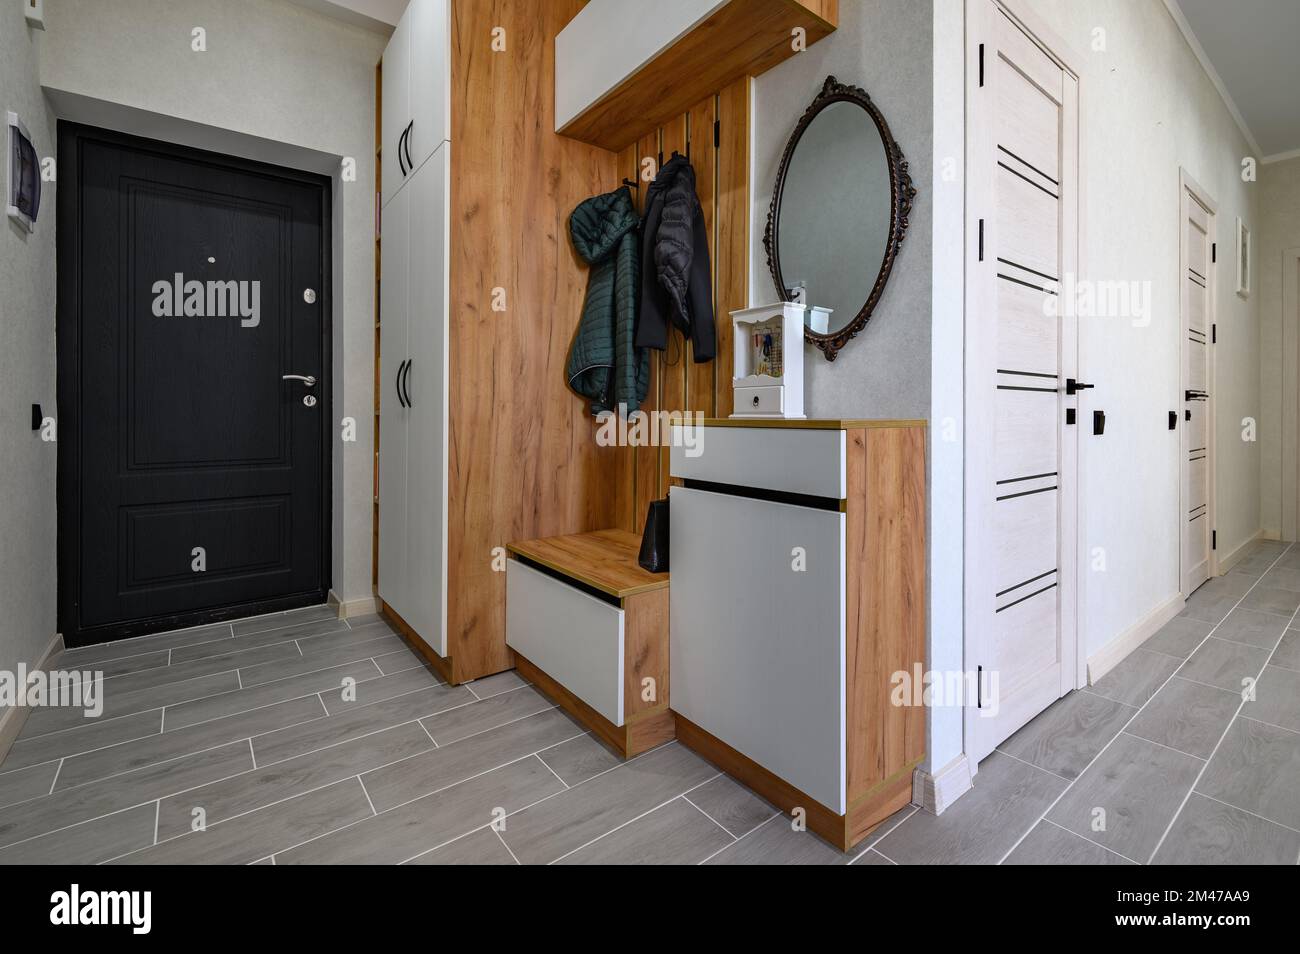 Small entrance hallway interior with shoe storage, hanger stand and mirror Stock Photo